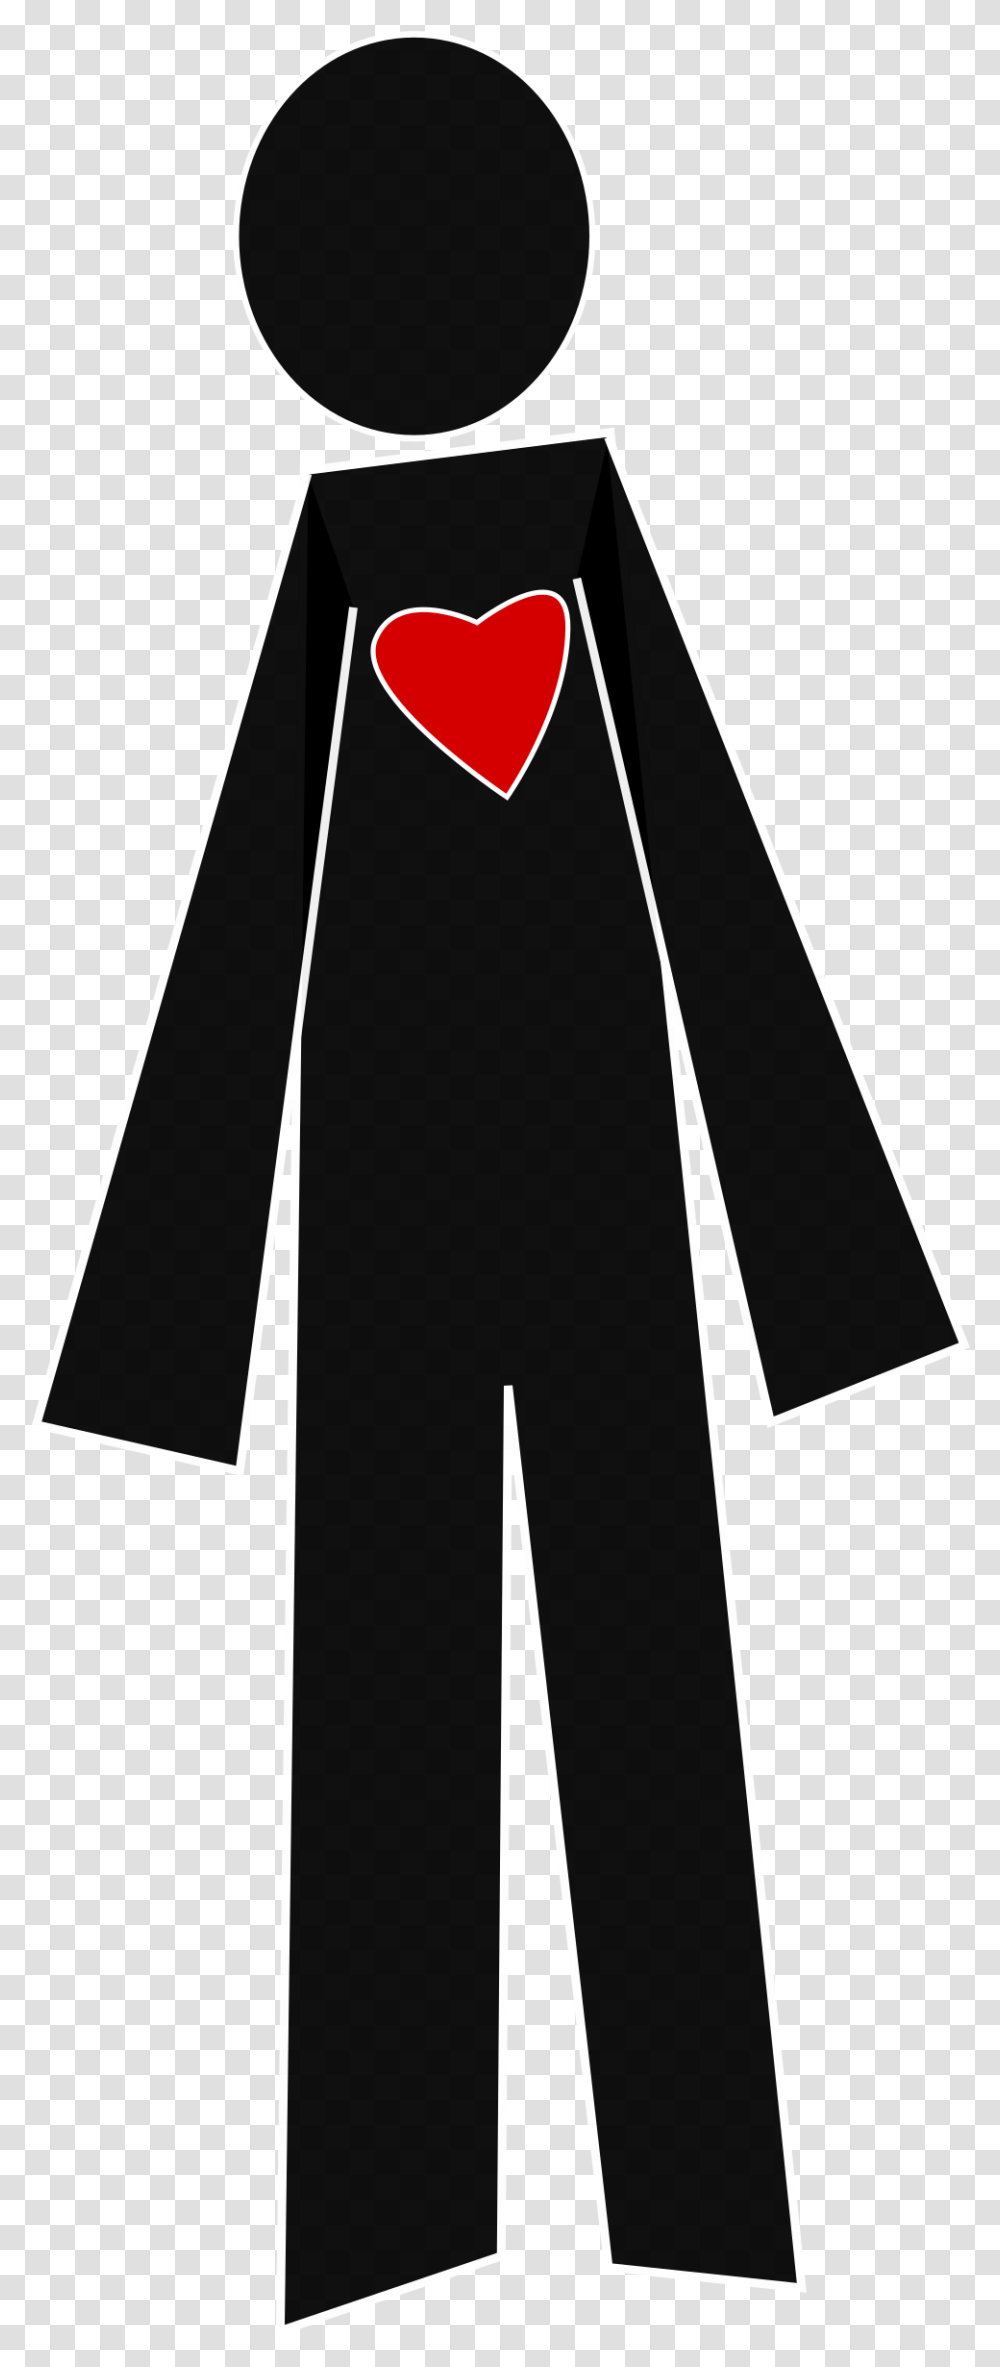 Clipart Of Person Thinking Clipartmonk Free Clip Art Images Human With Heart Cartoon, Clothing, Utility Pole, Fashion, Cloak Transparent Png